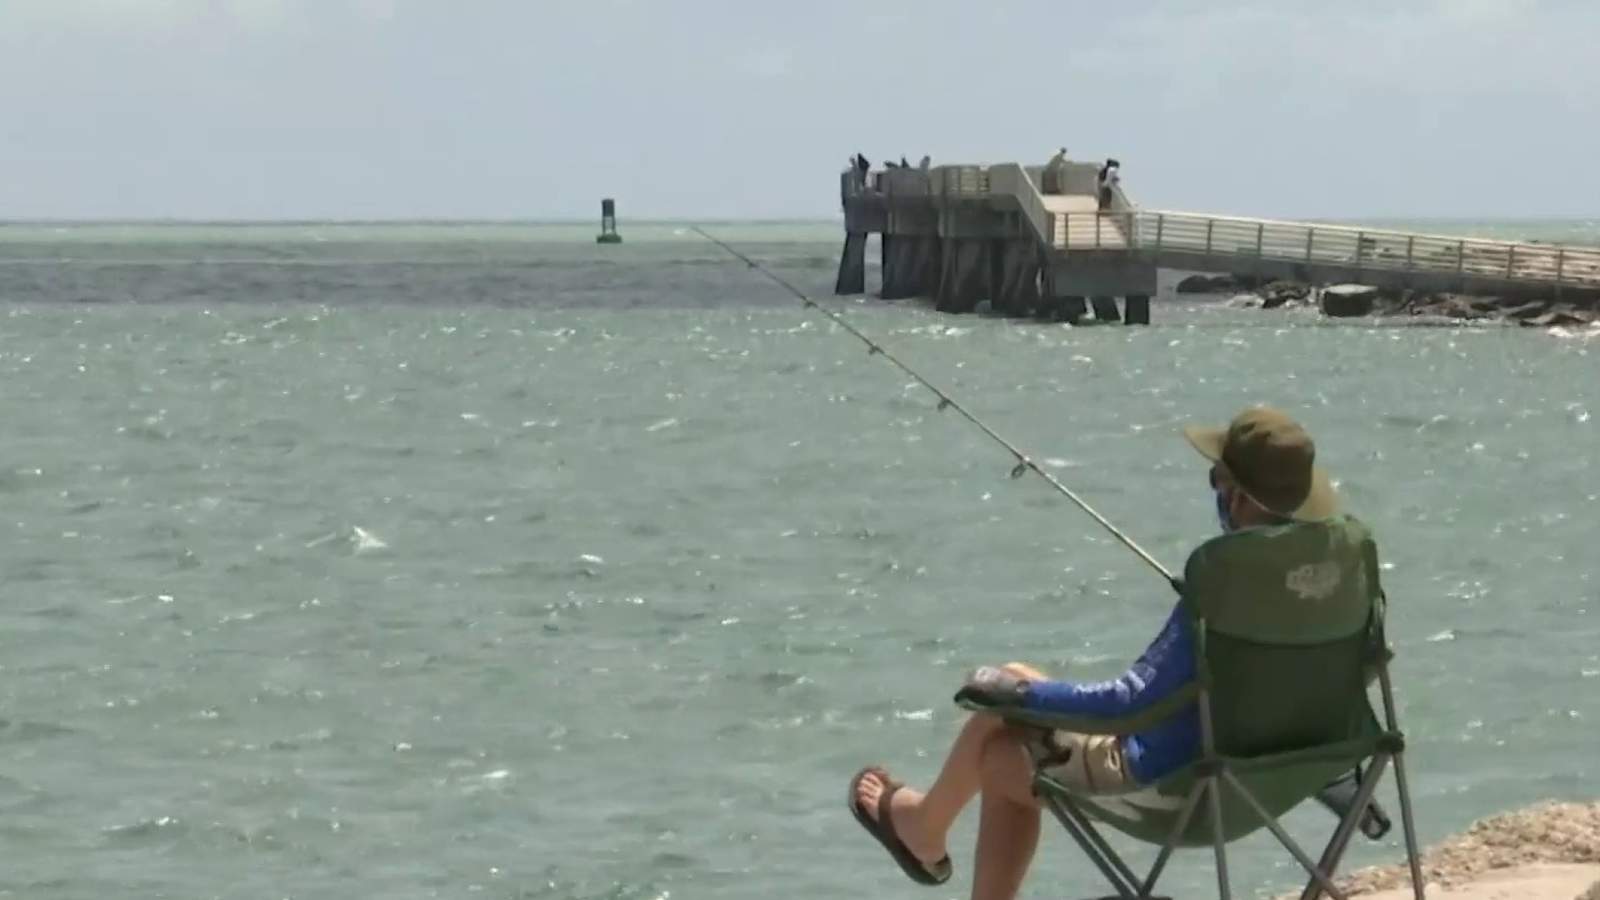 Jetty Park adds rules, restrictions during reopening